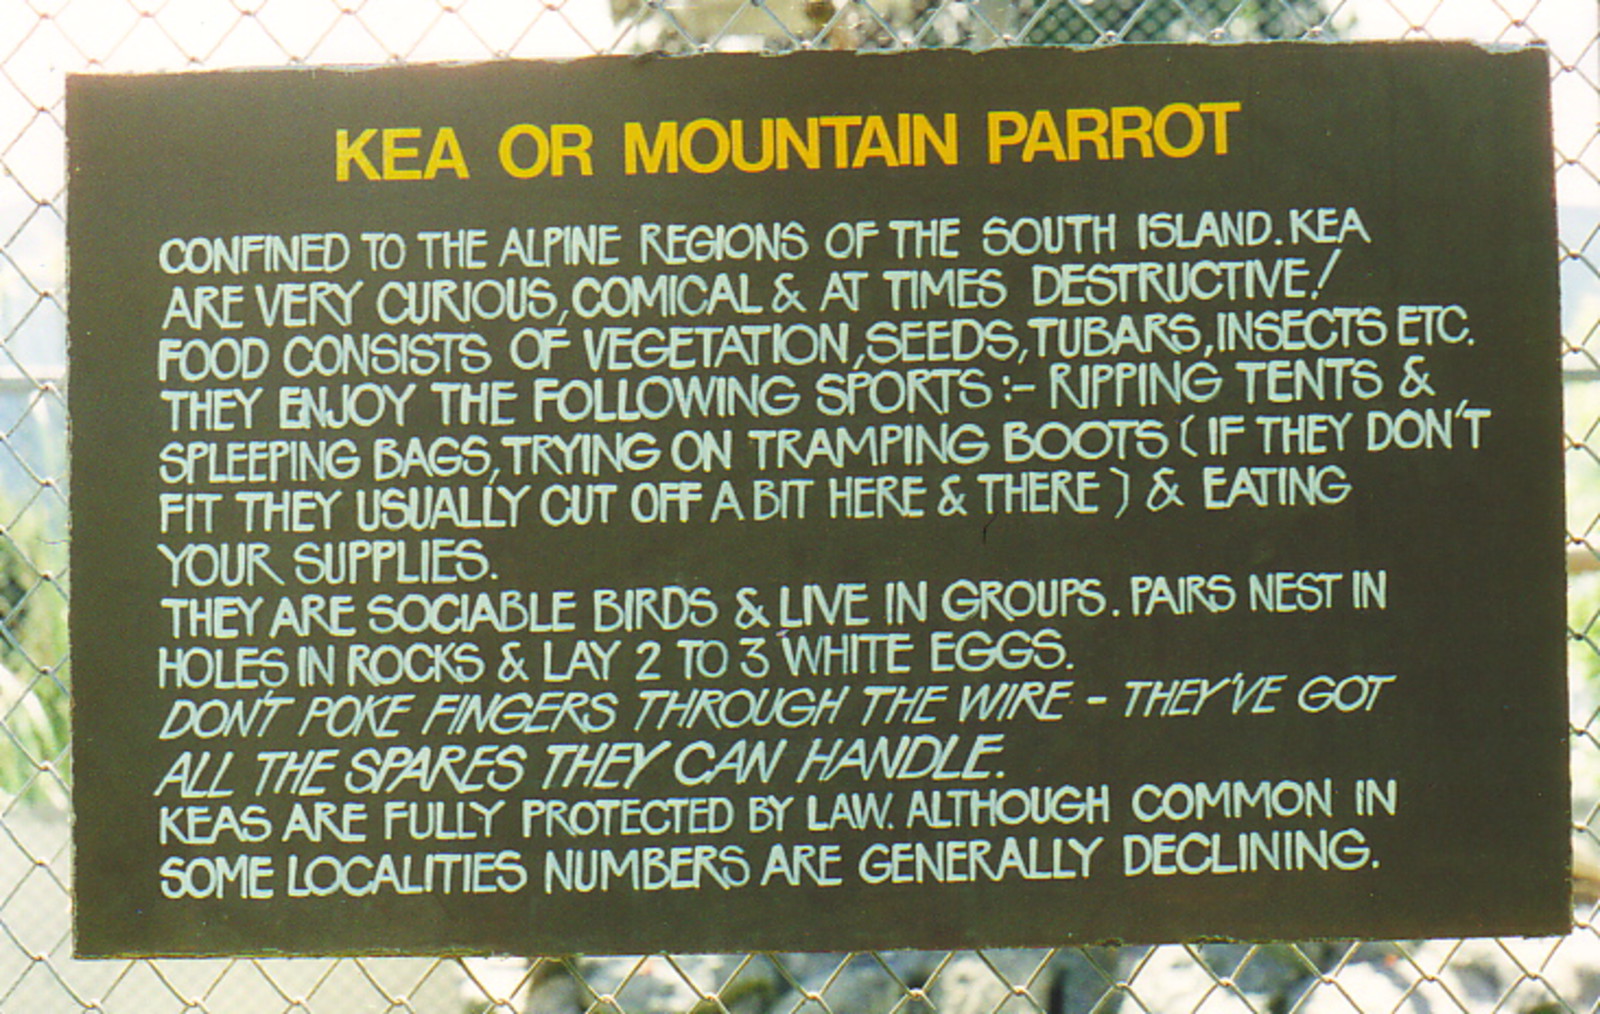 A warning sign about keas